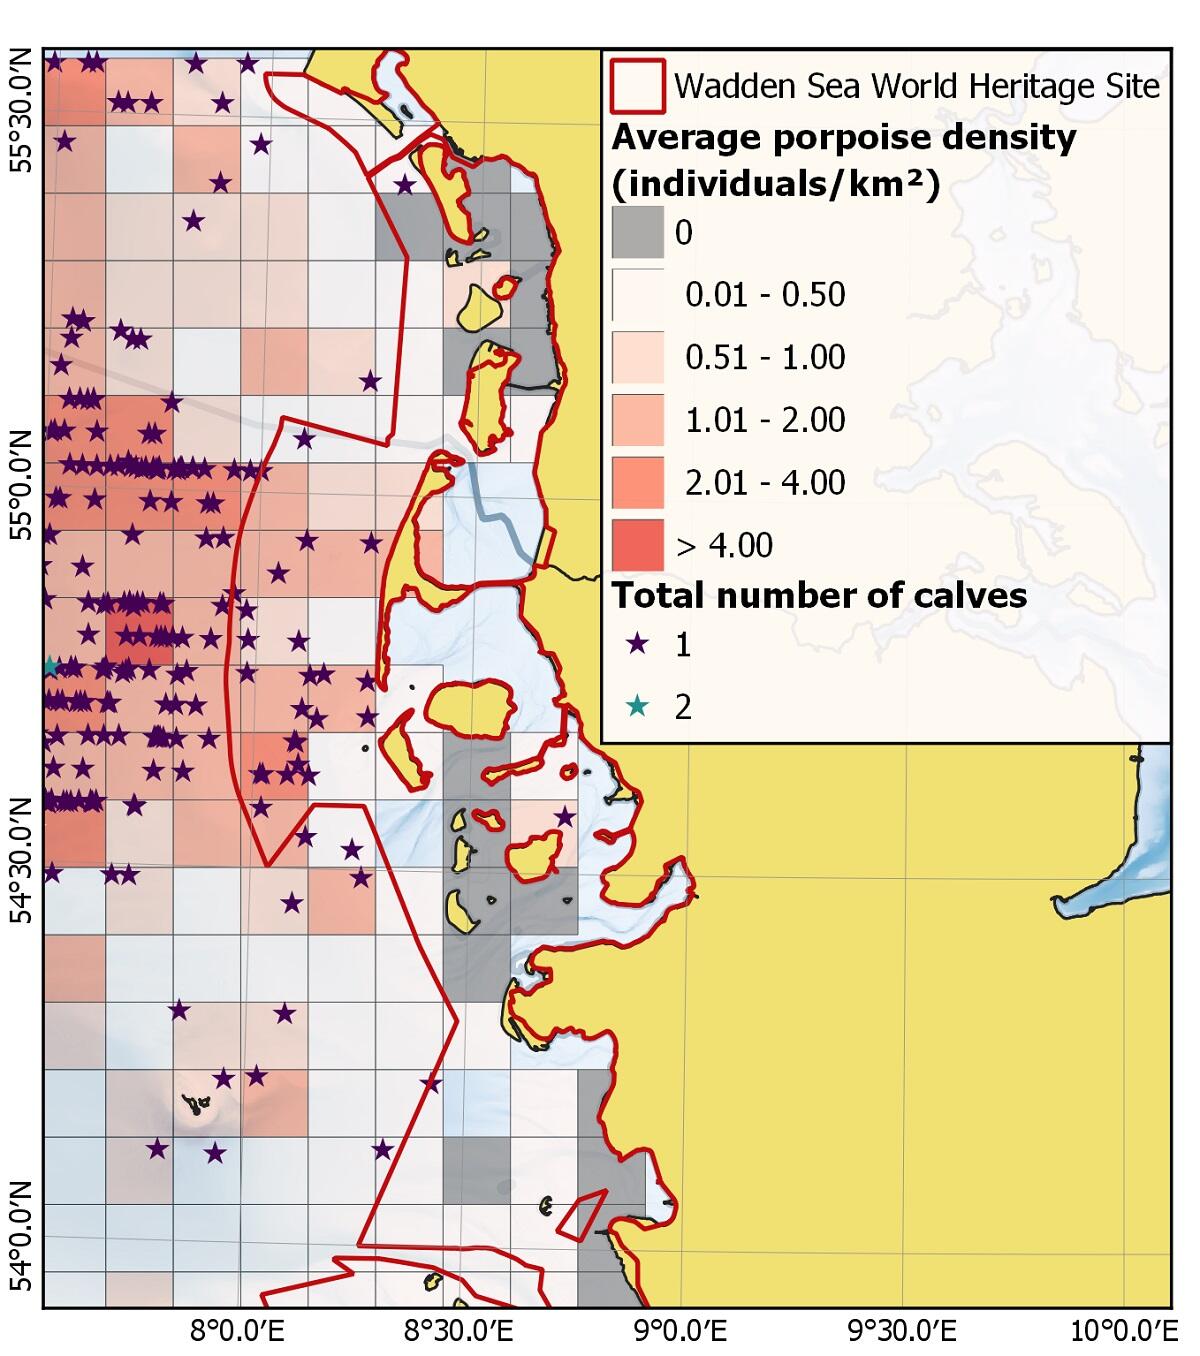 Figure 9. Average porpoise density and calf sightings for Danish (2011-2019) and German waters (2002 to 2020) during summer (June, July, August) (adapted from Scheidat et al. (under review)).